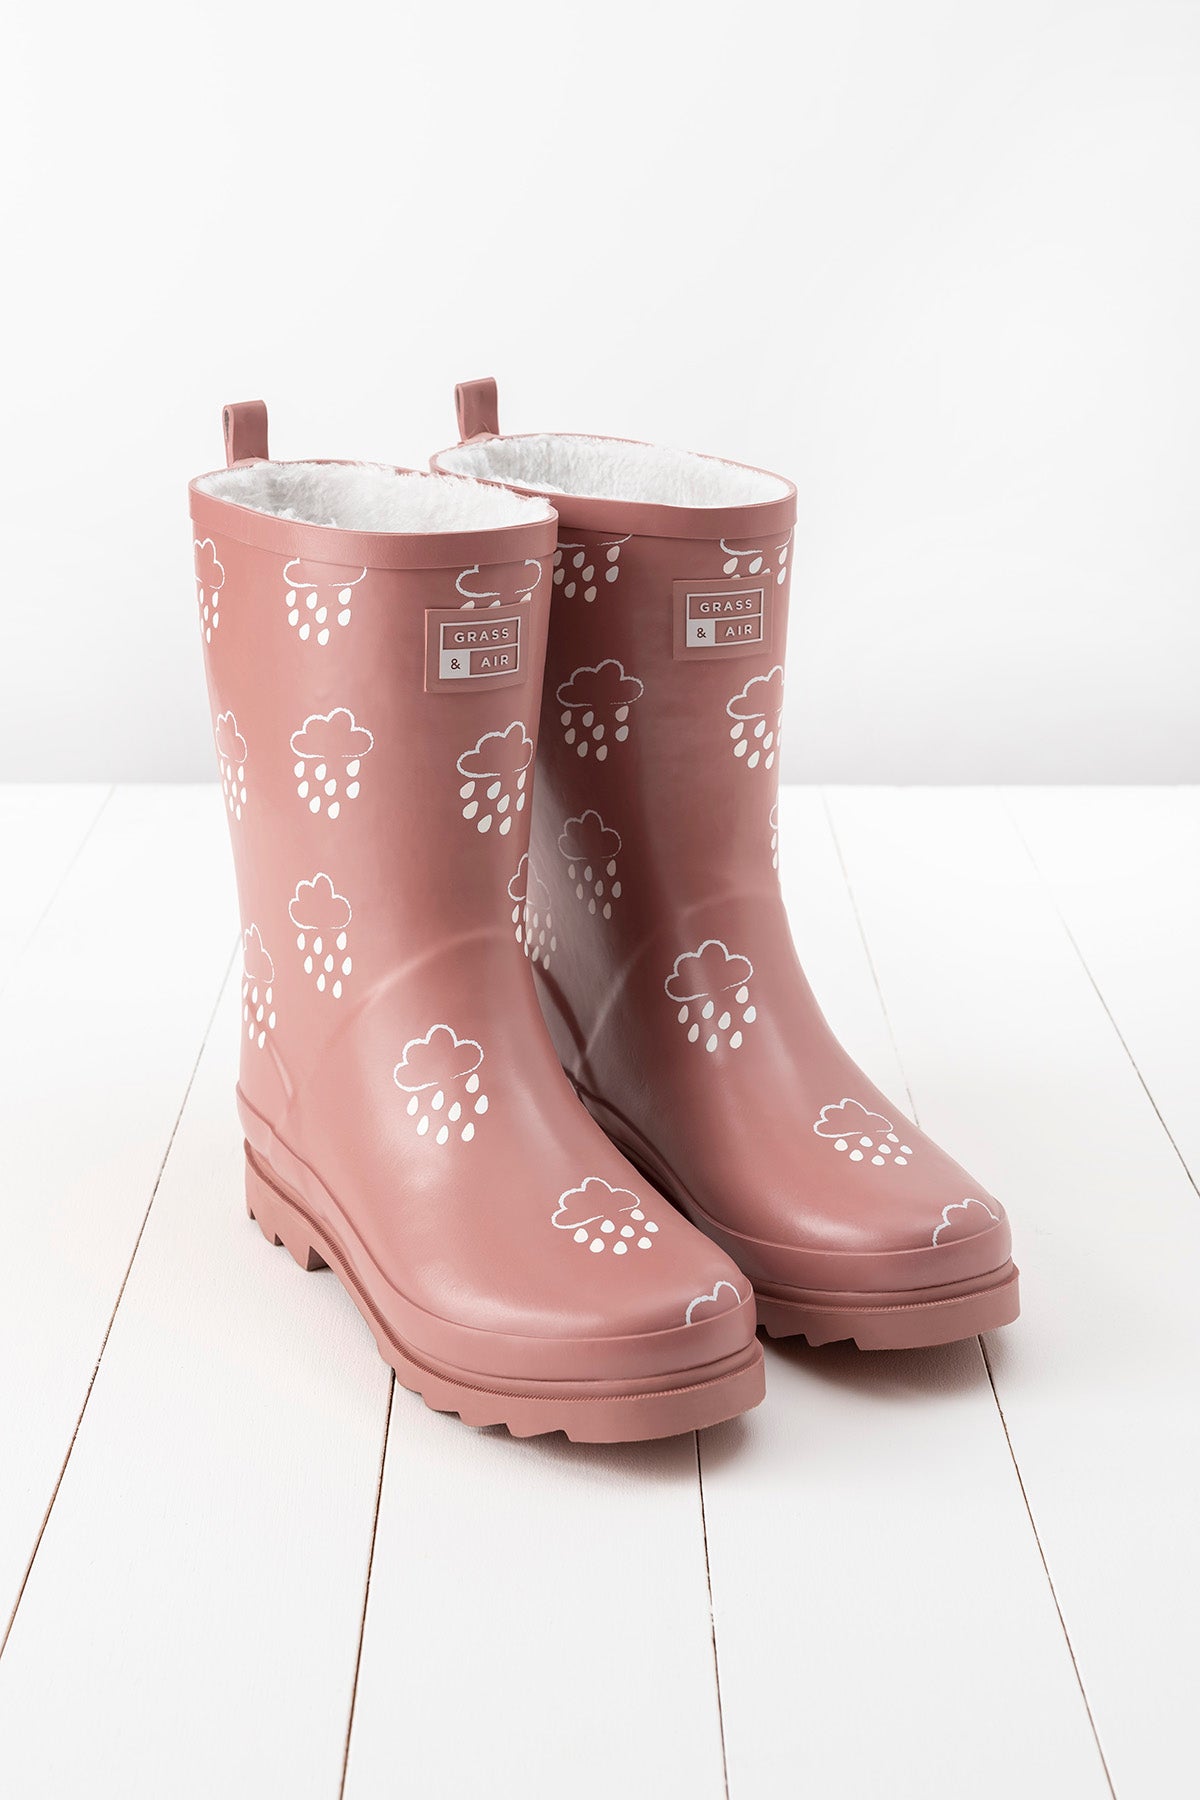 Adult Rose Colour-Changing Wellies